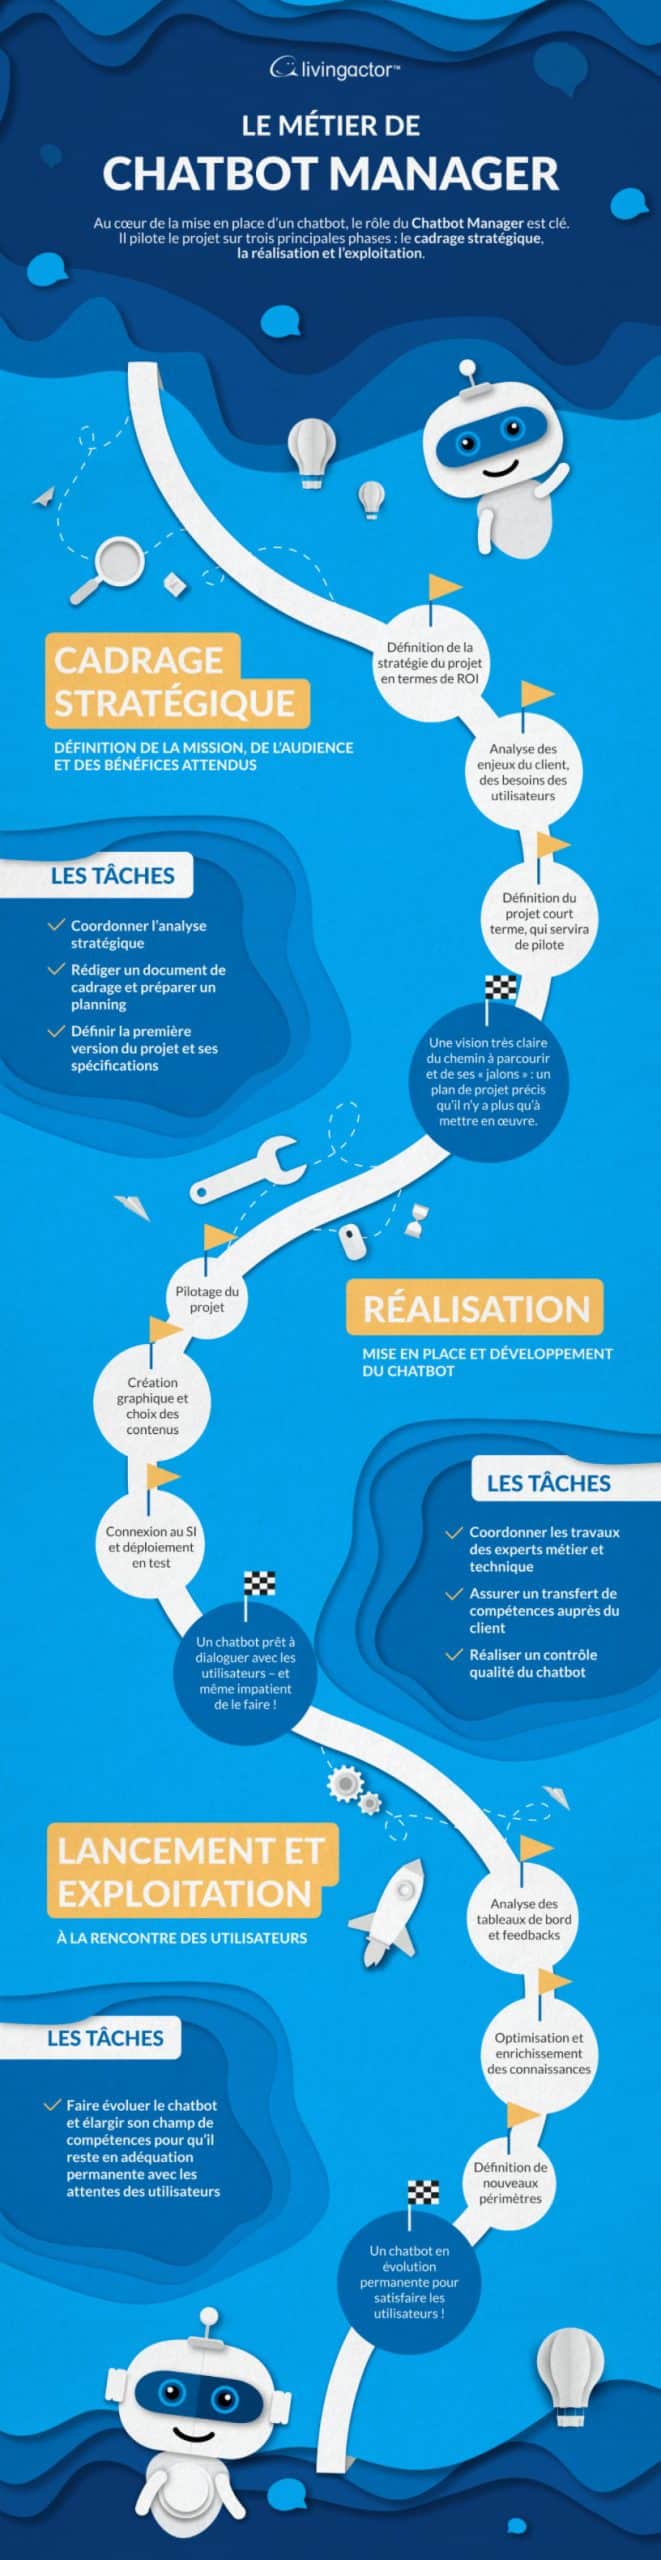 infographie chatbotmanager